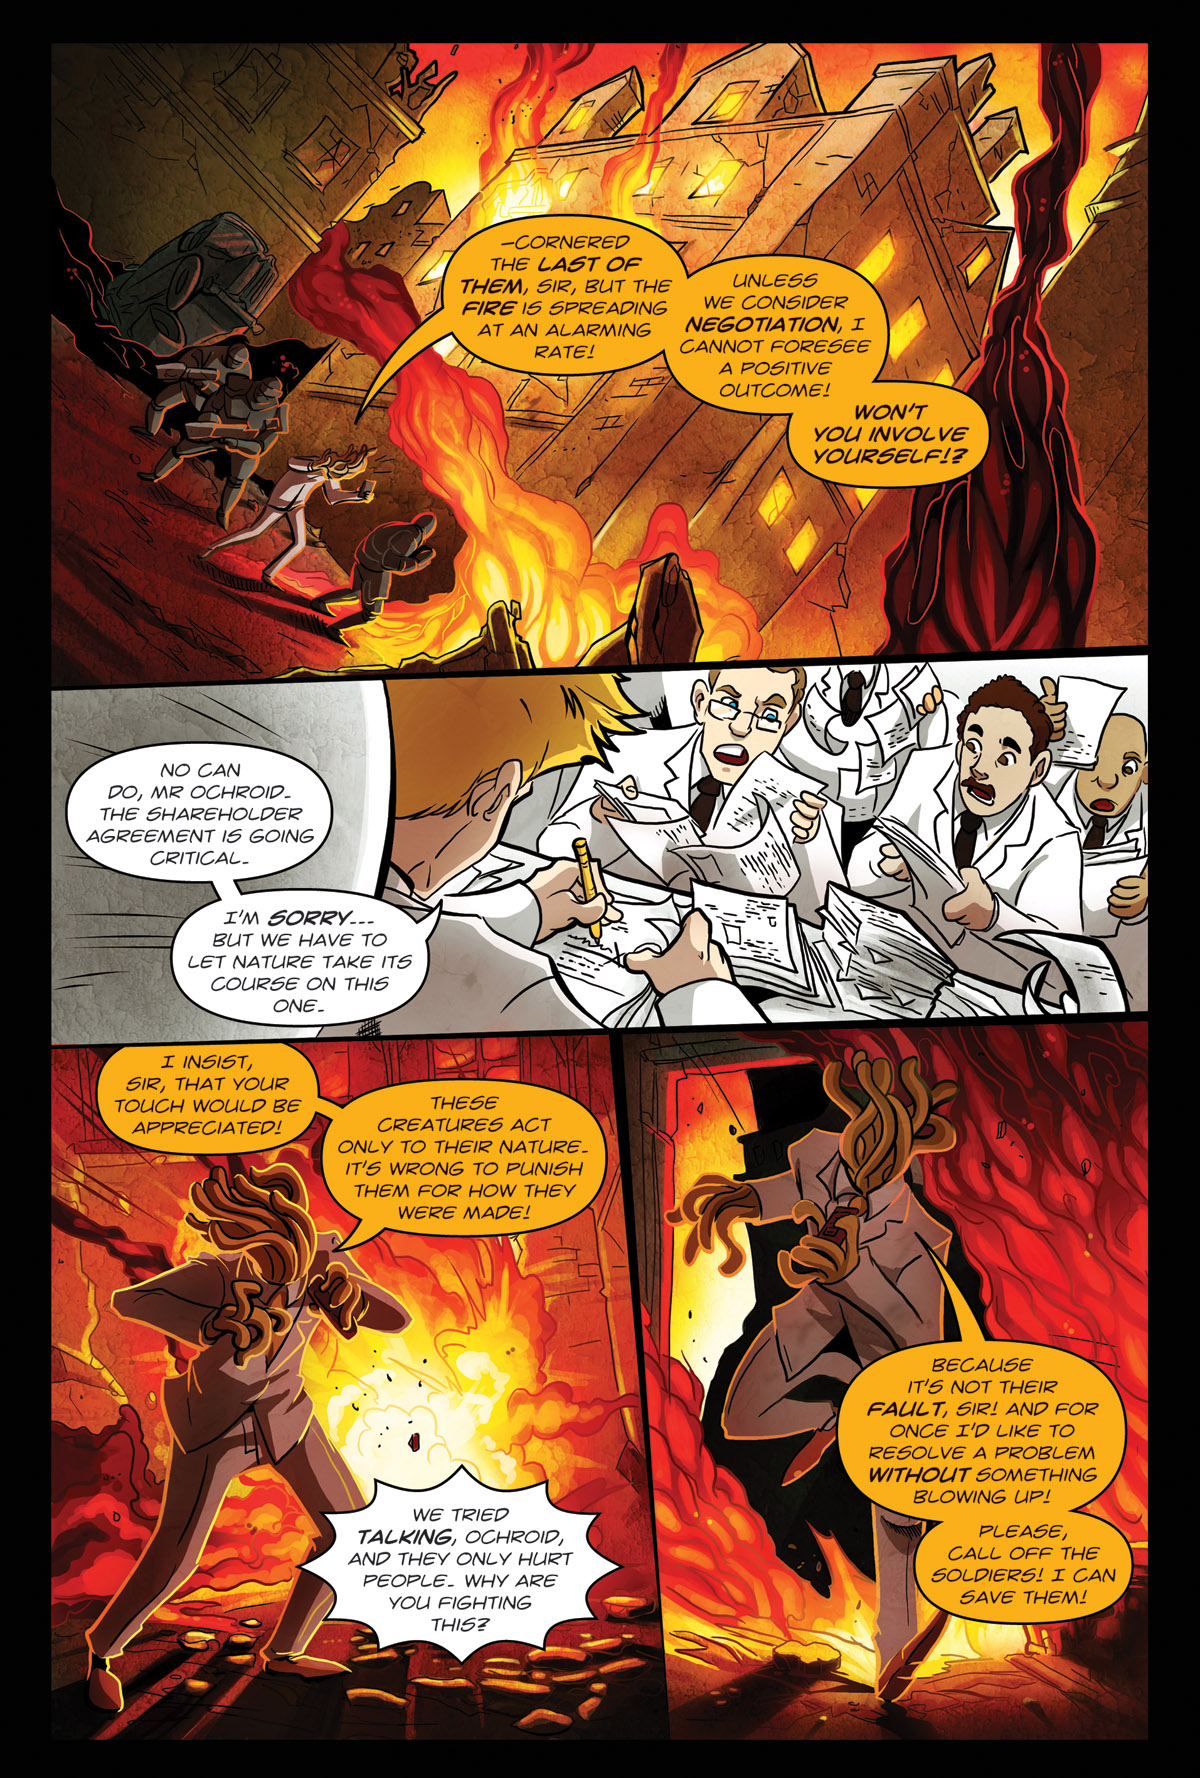 Afterlife Inc. | Dead Days | Ochroid | Page 1